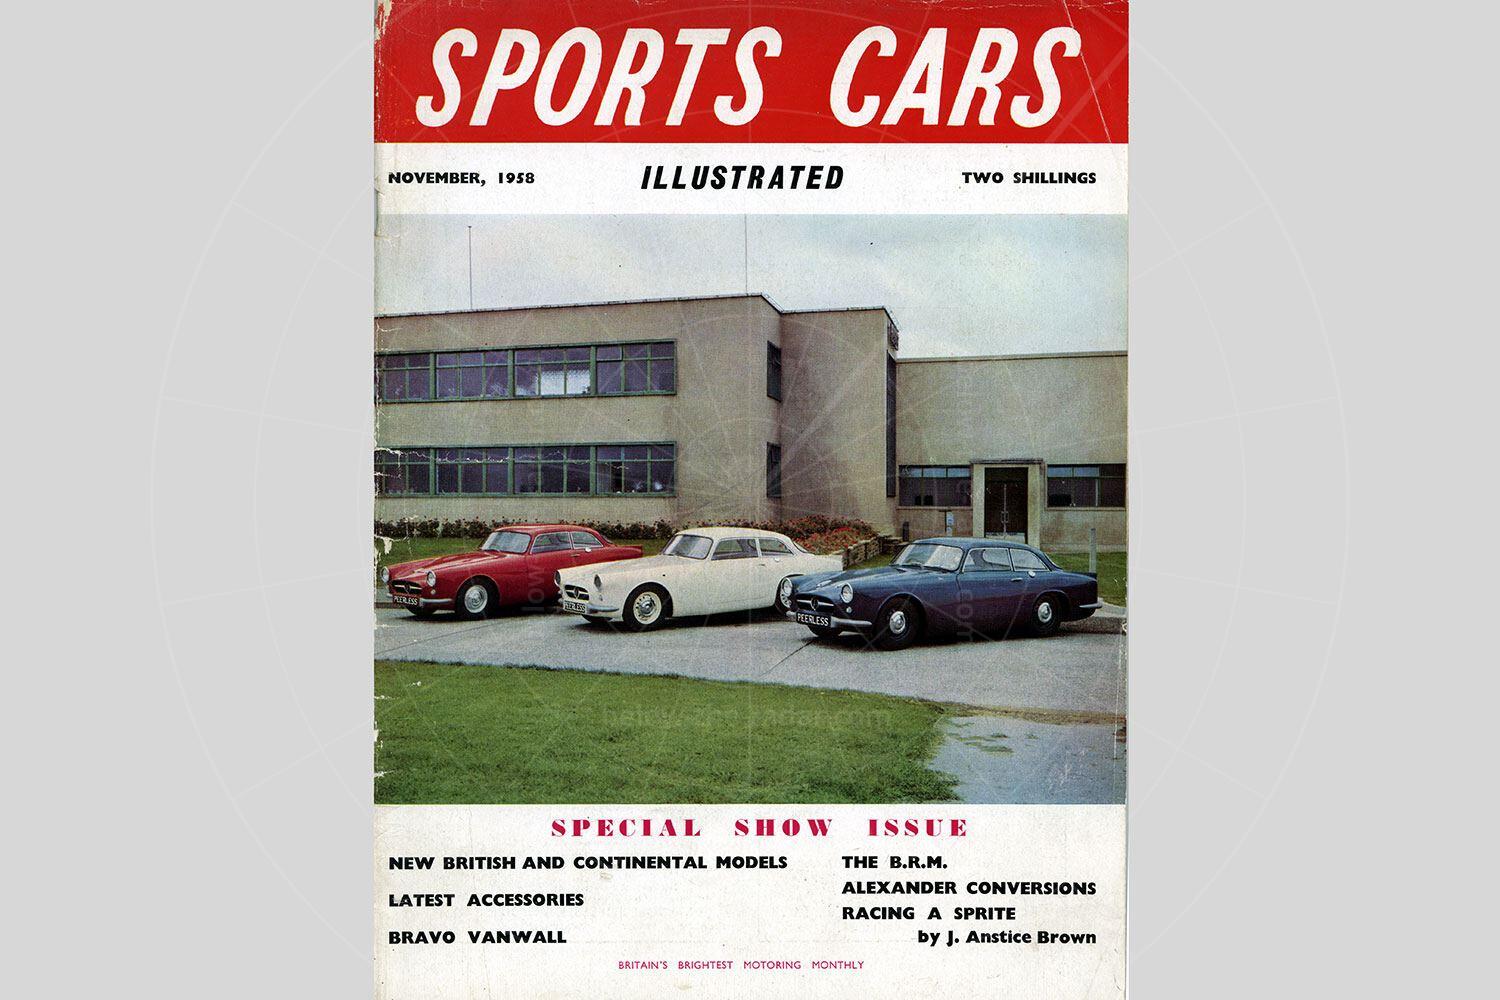 The Peerless factory on the front cover of Sports Car Illustrated in 1958 Pic: magiccarpics.co.uk | The Peerless factory on the front cover of Sports Car Illustrated in 1958